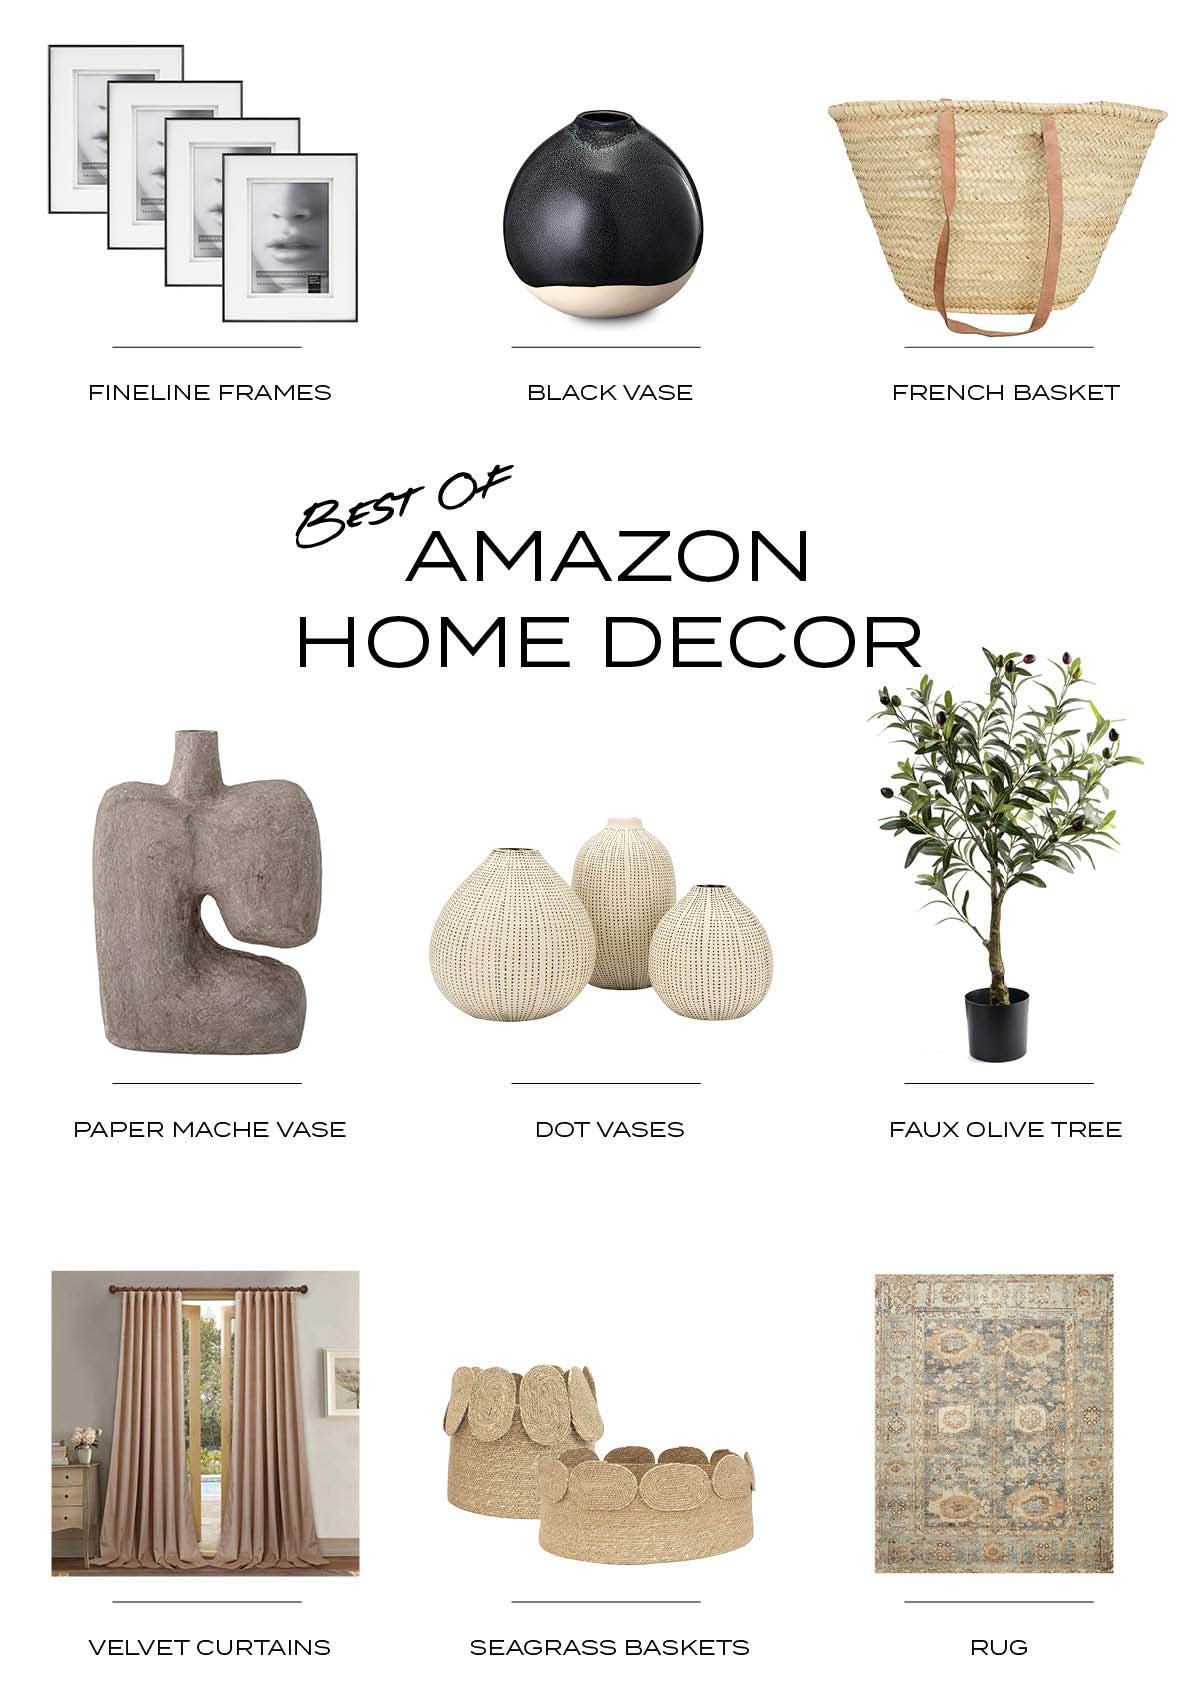 Best Of Amazon Home Decor curated by an interior designer